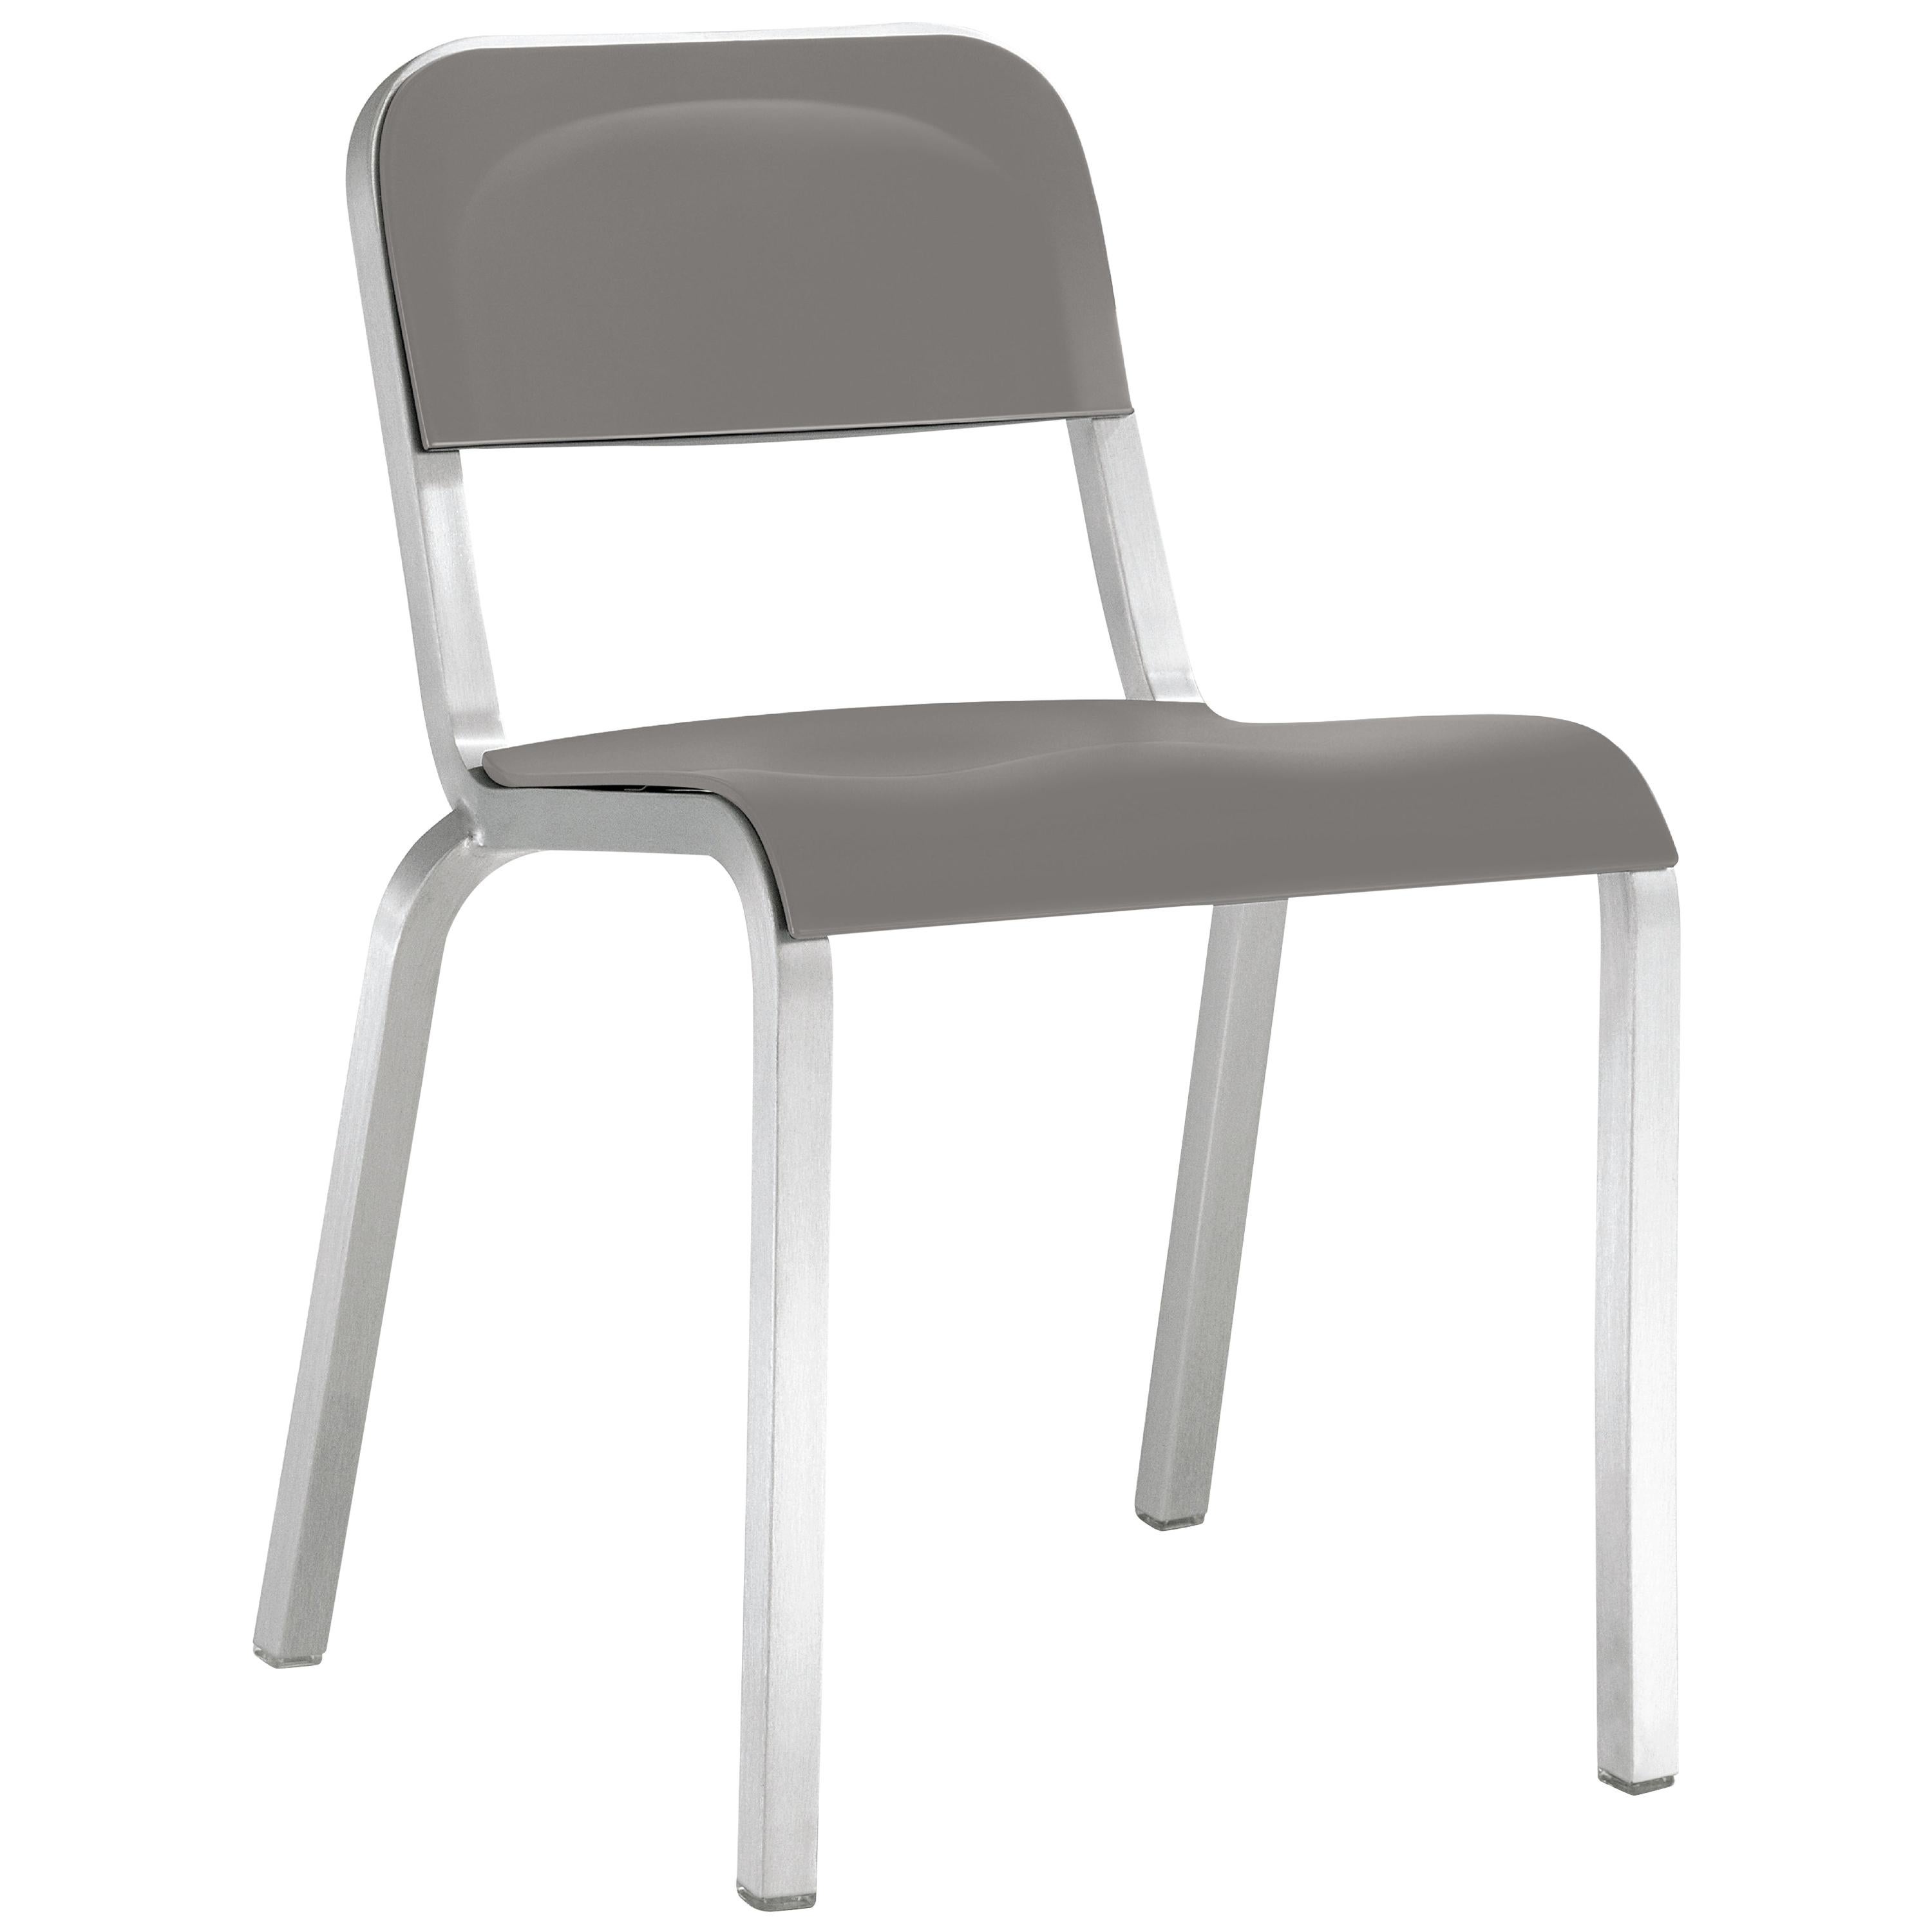 Emeco 1951 Aluminum Stacking Chair with Flint Gray Seat by Adrian Van Hooydonk For Sale